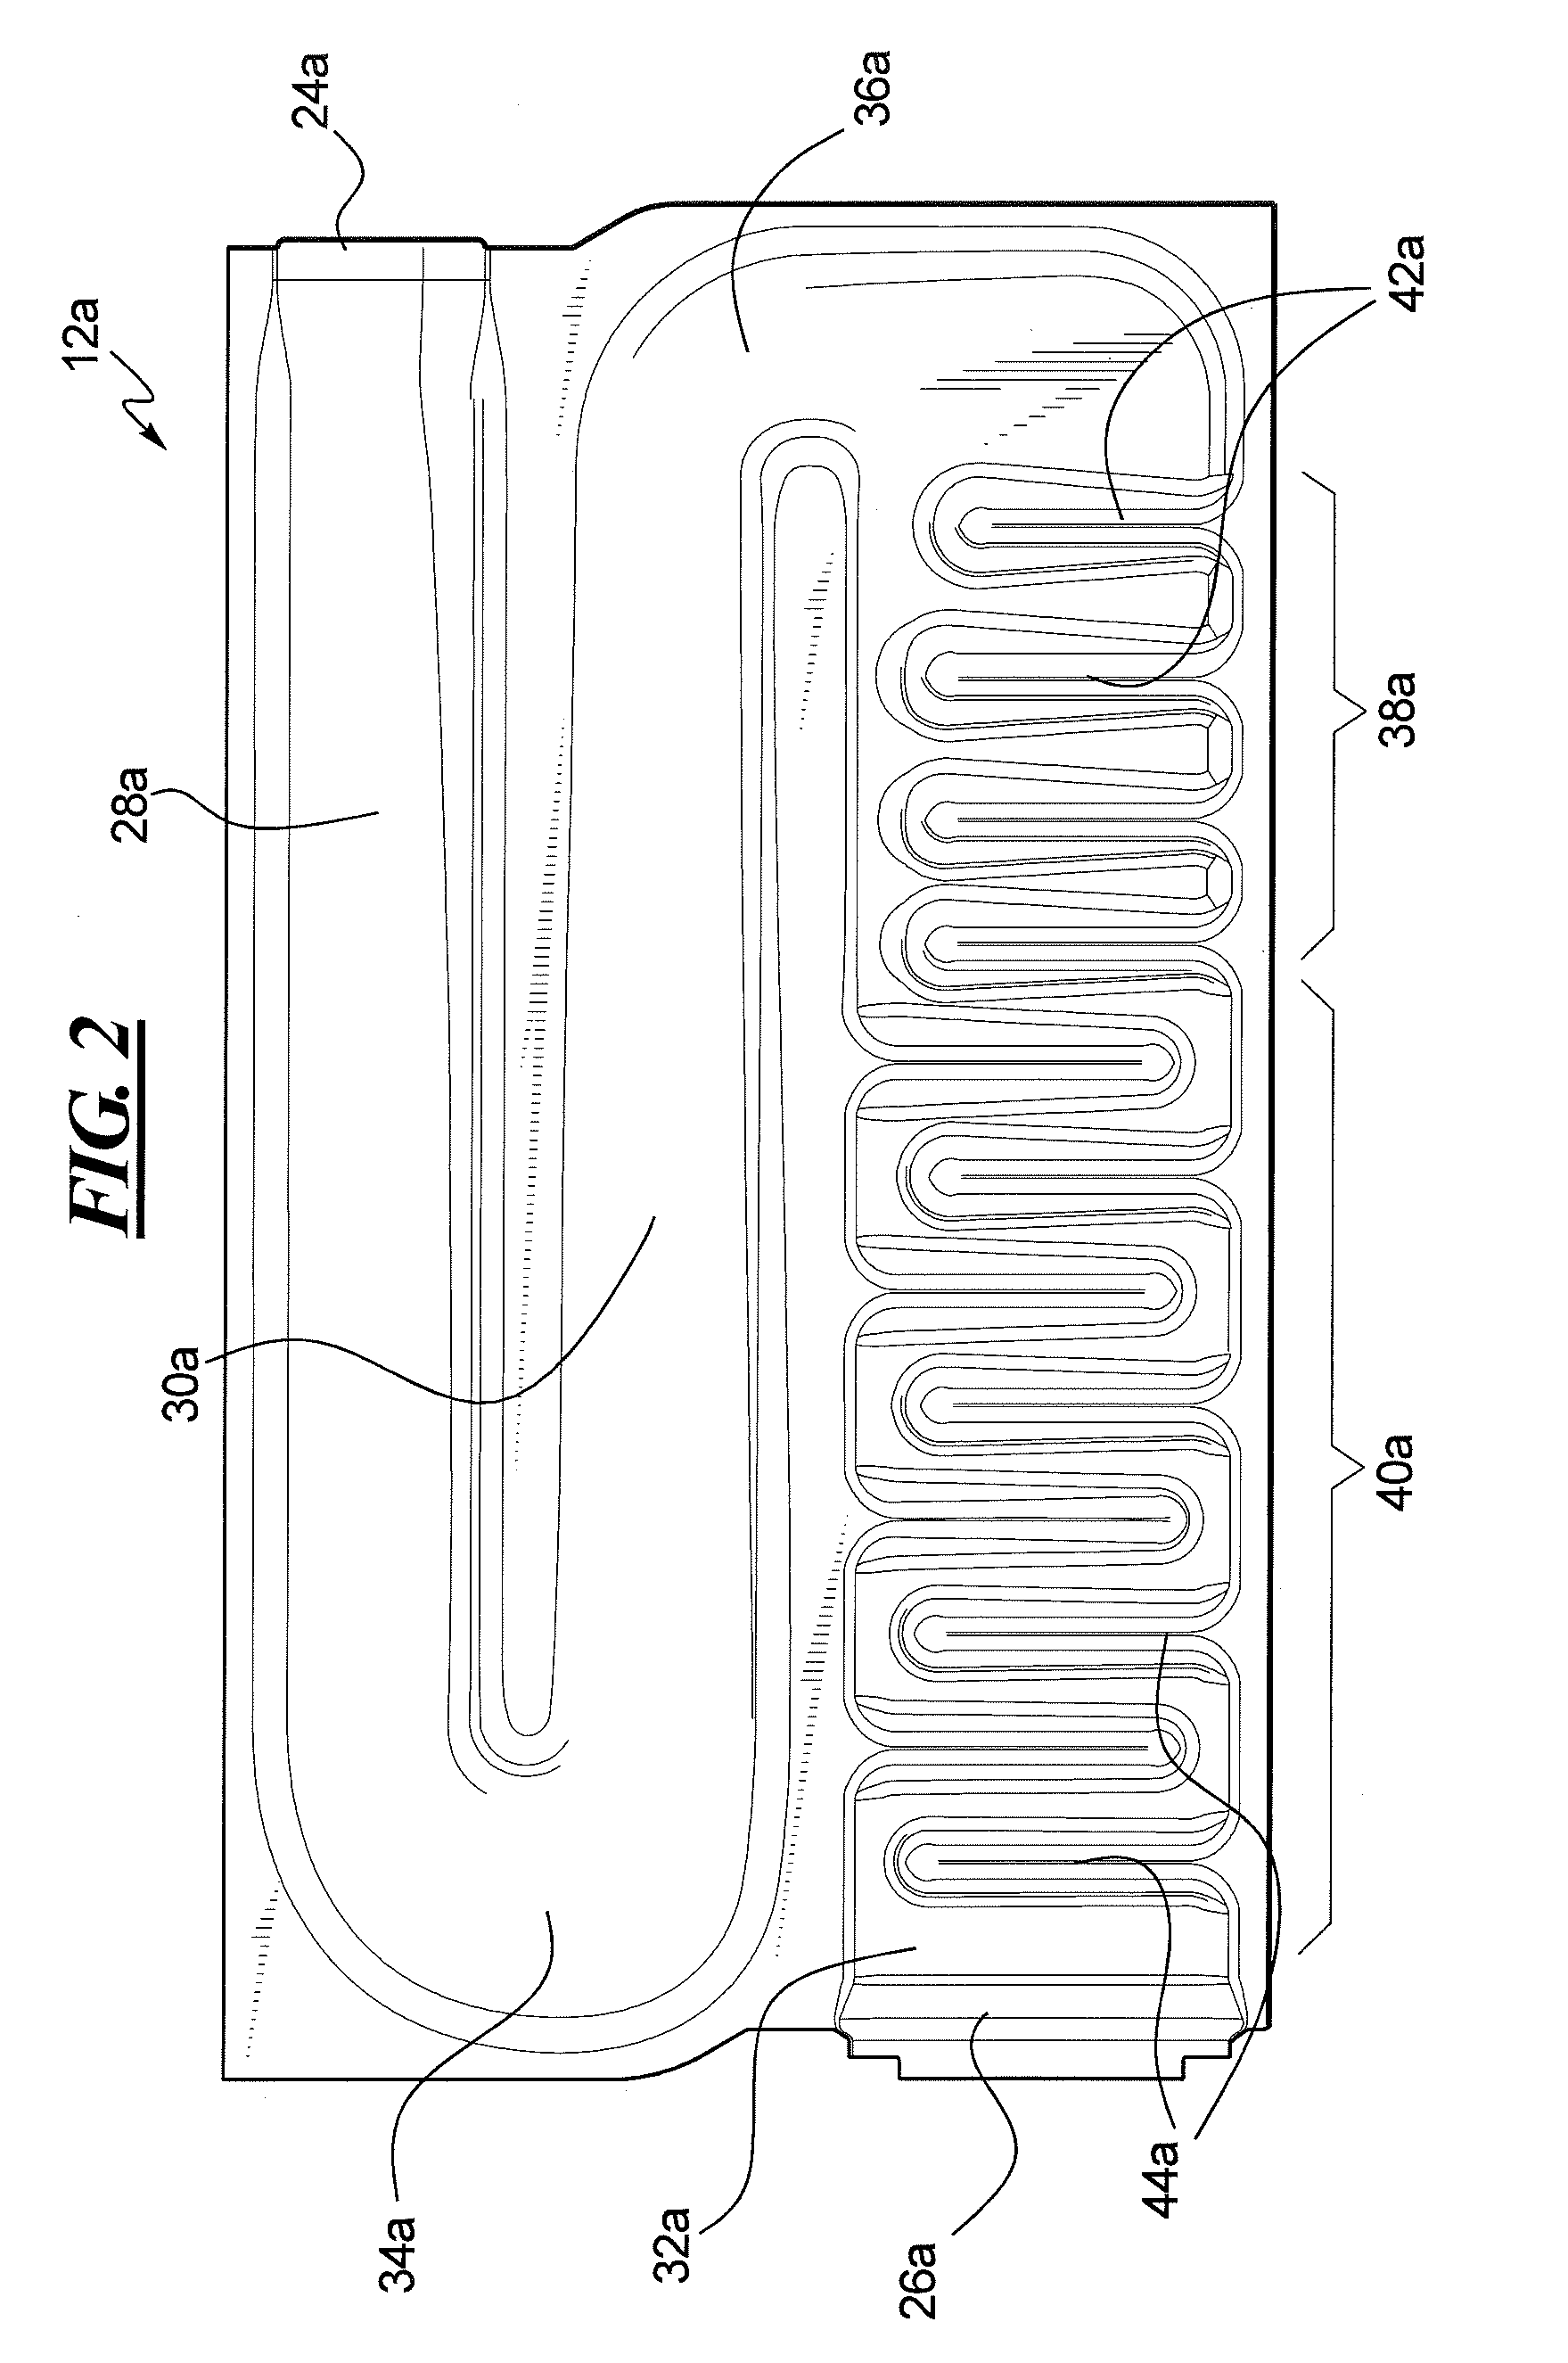 Primary Heat Exchanger Design for Condensing Gas Furnace